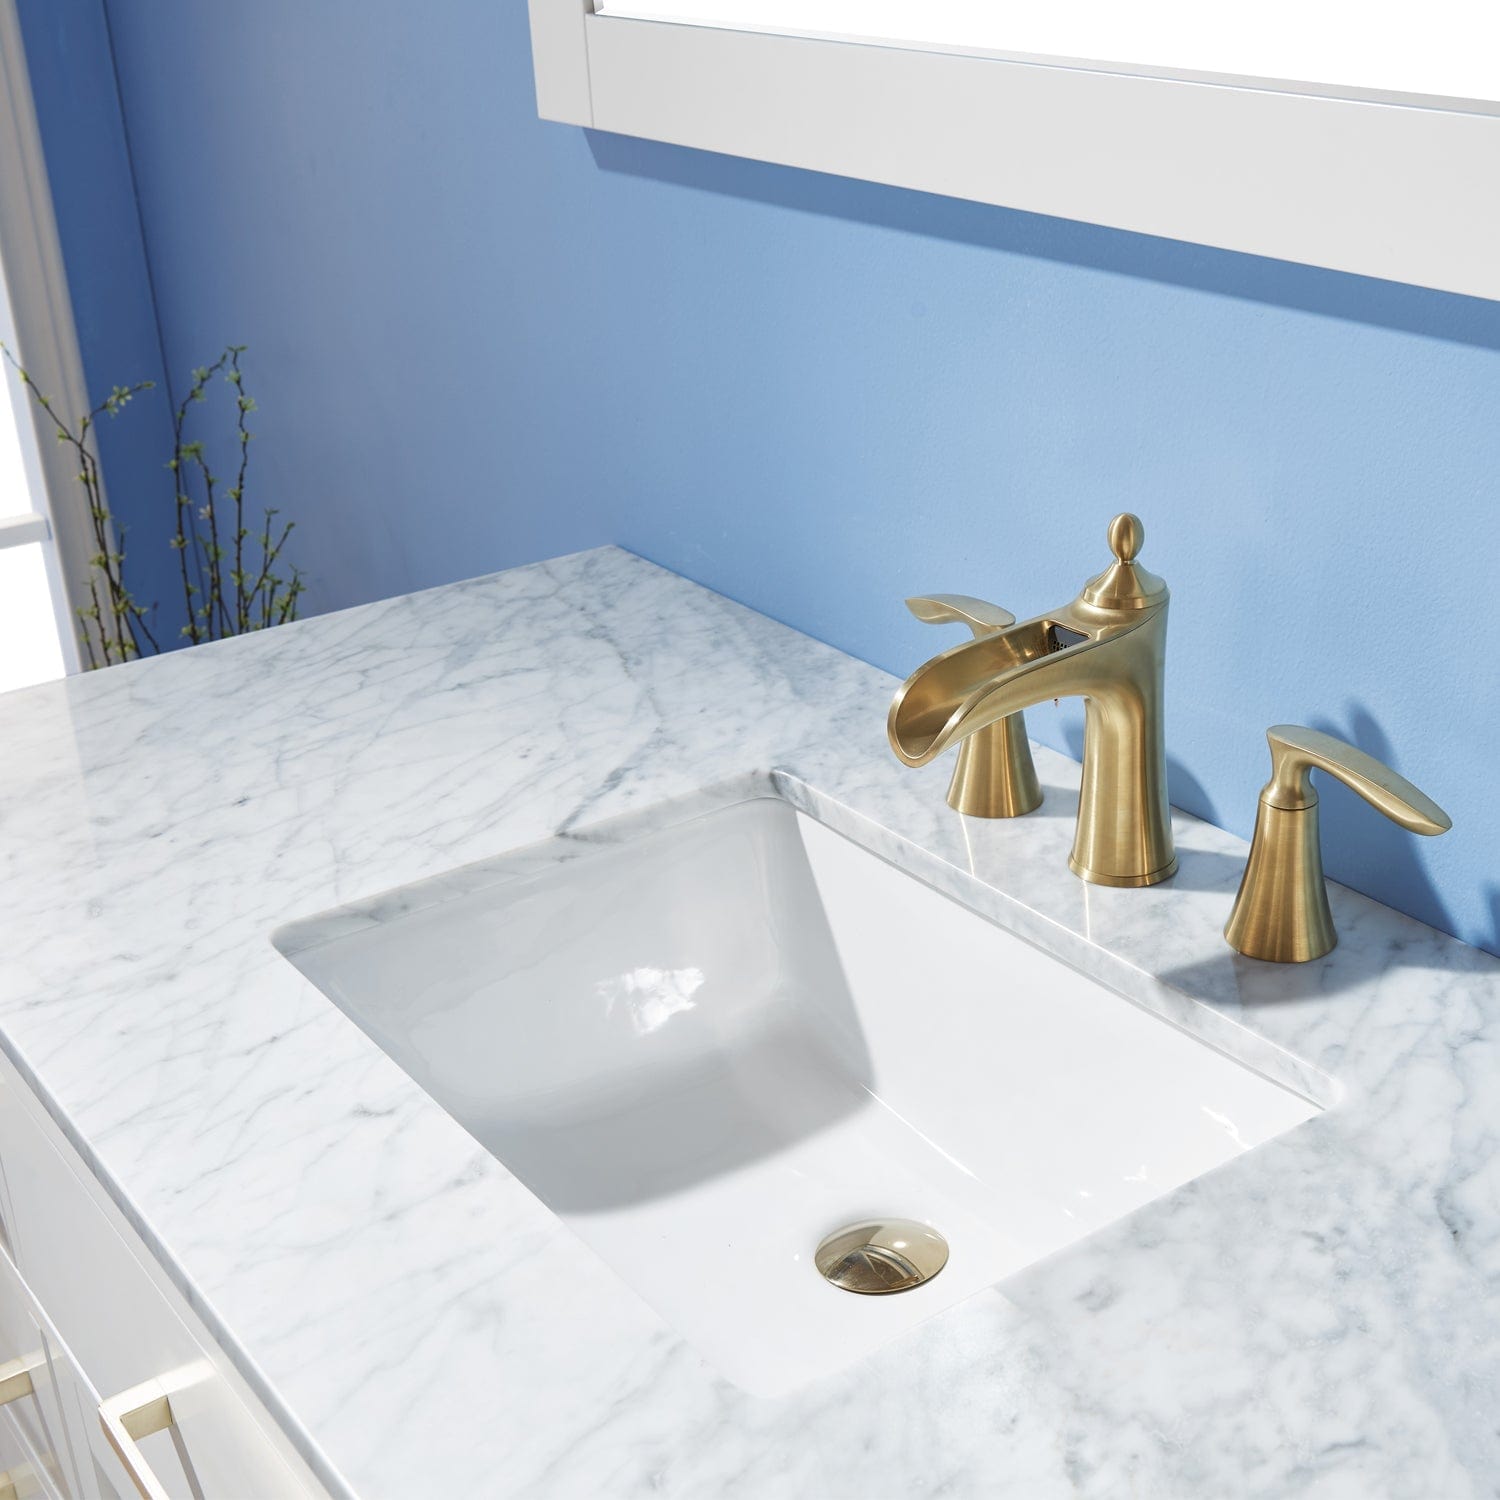 Altair Ivy 48" Single Bathroom Vanity Set in White and Carrara White Marble Countertop with Mirror 531048-WH-CA - Molaix631112971195Vanity531048-WH-CA